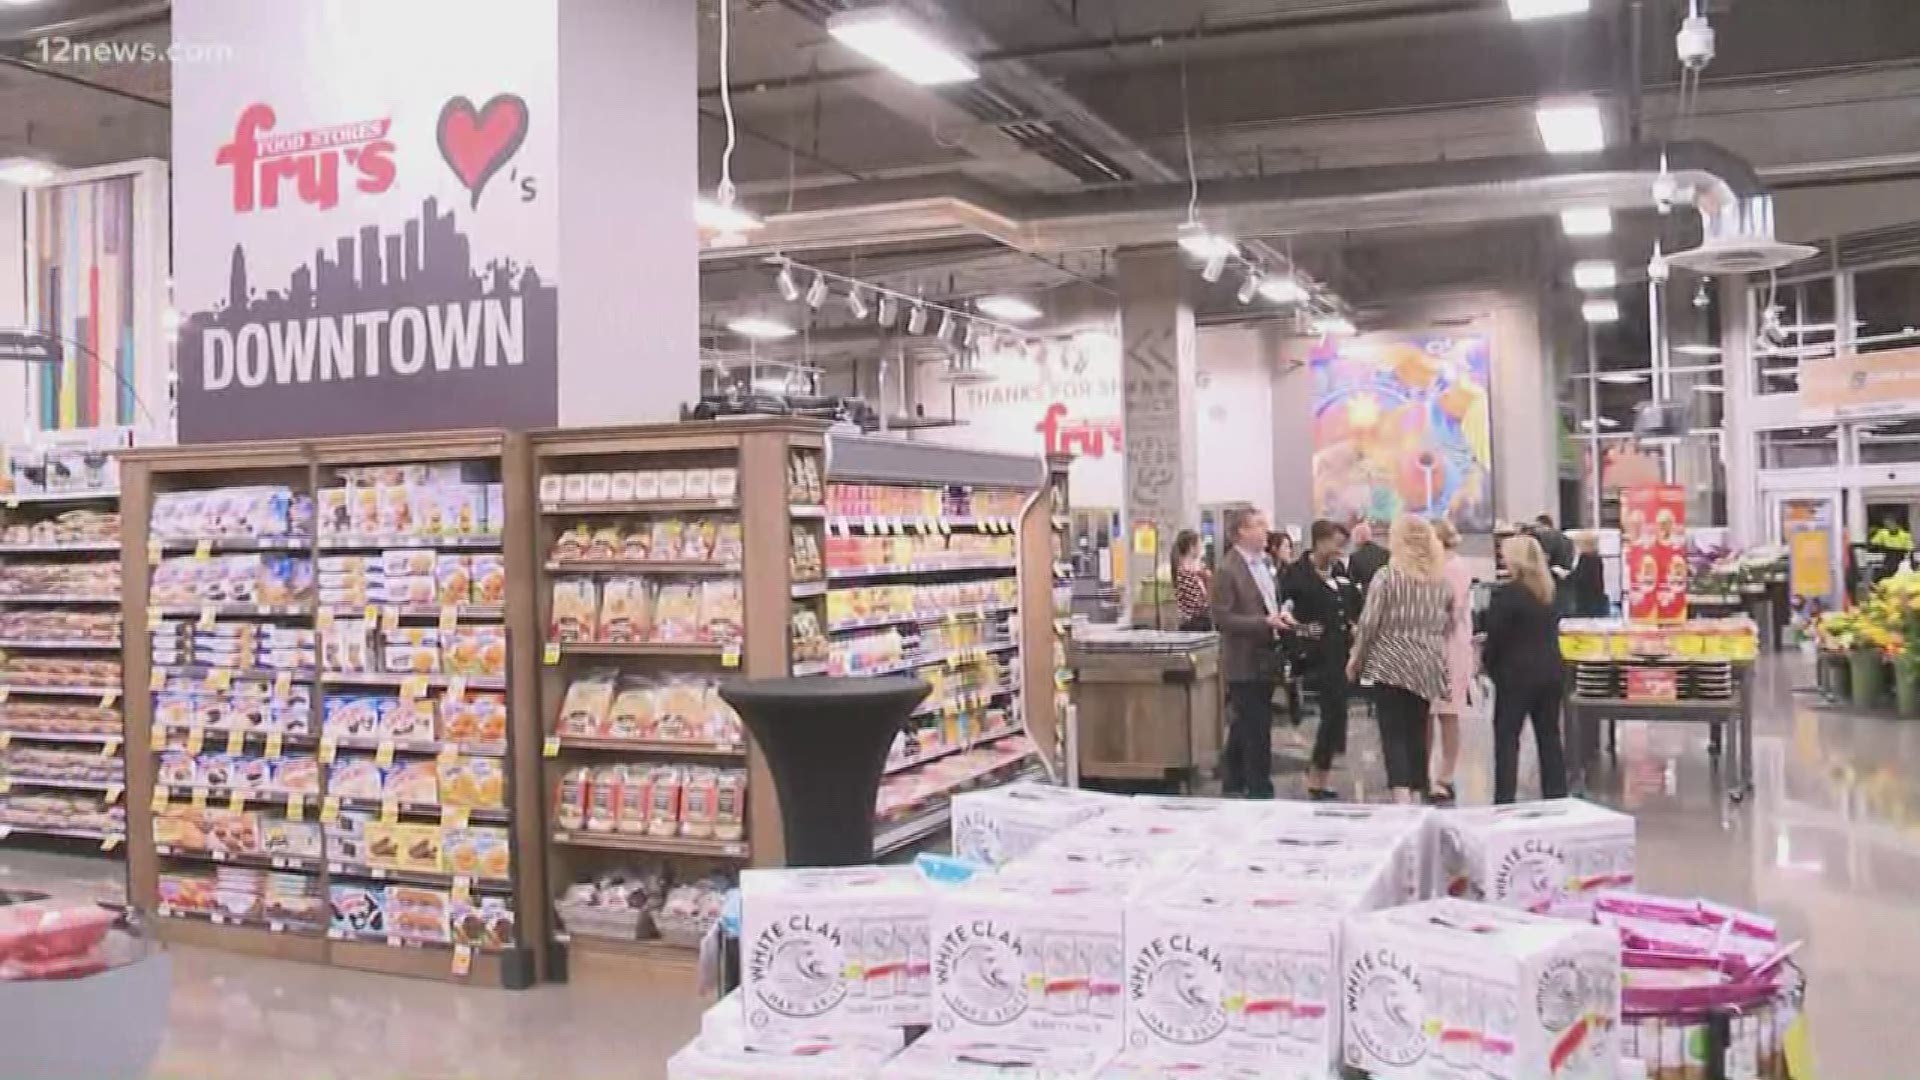 Fry's is officially opening their downtown Phoenix grocery store location at 8 a.m. on Oct. 23. Jen Wahl has the details.